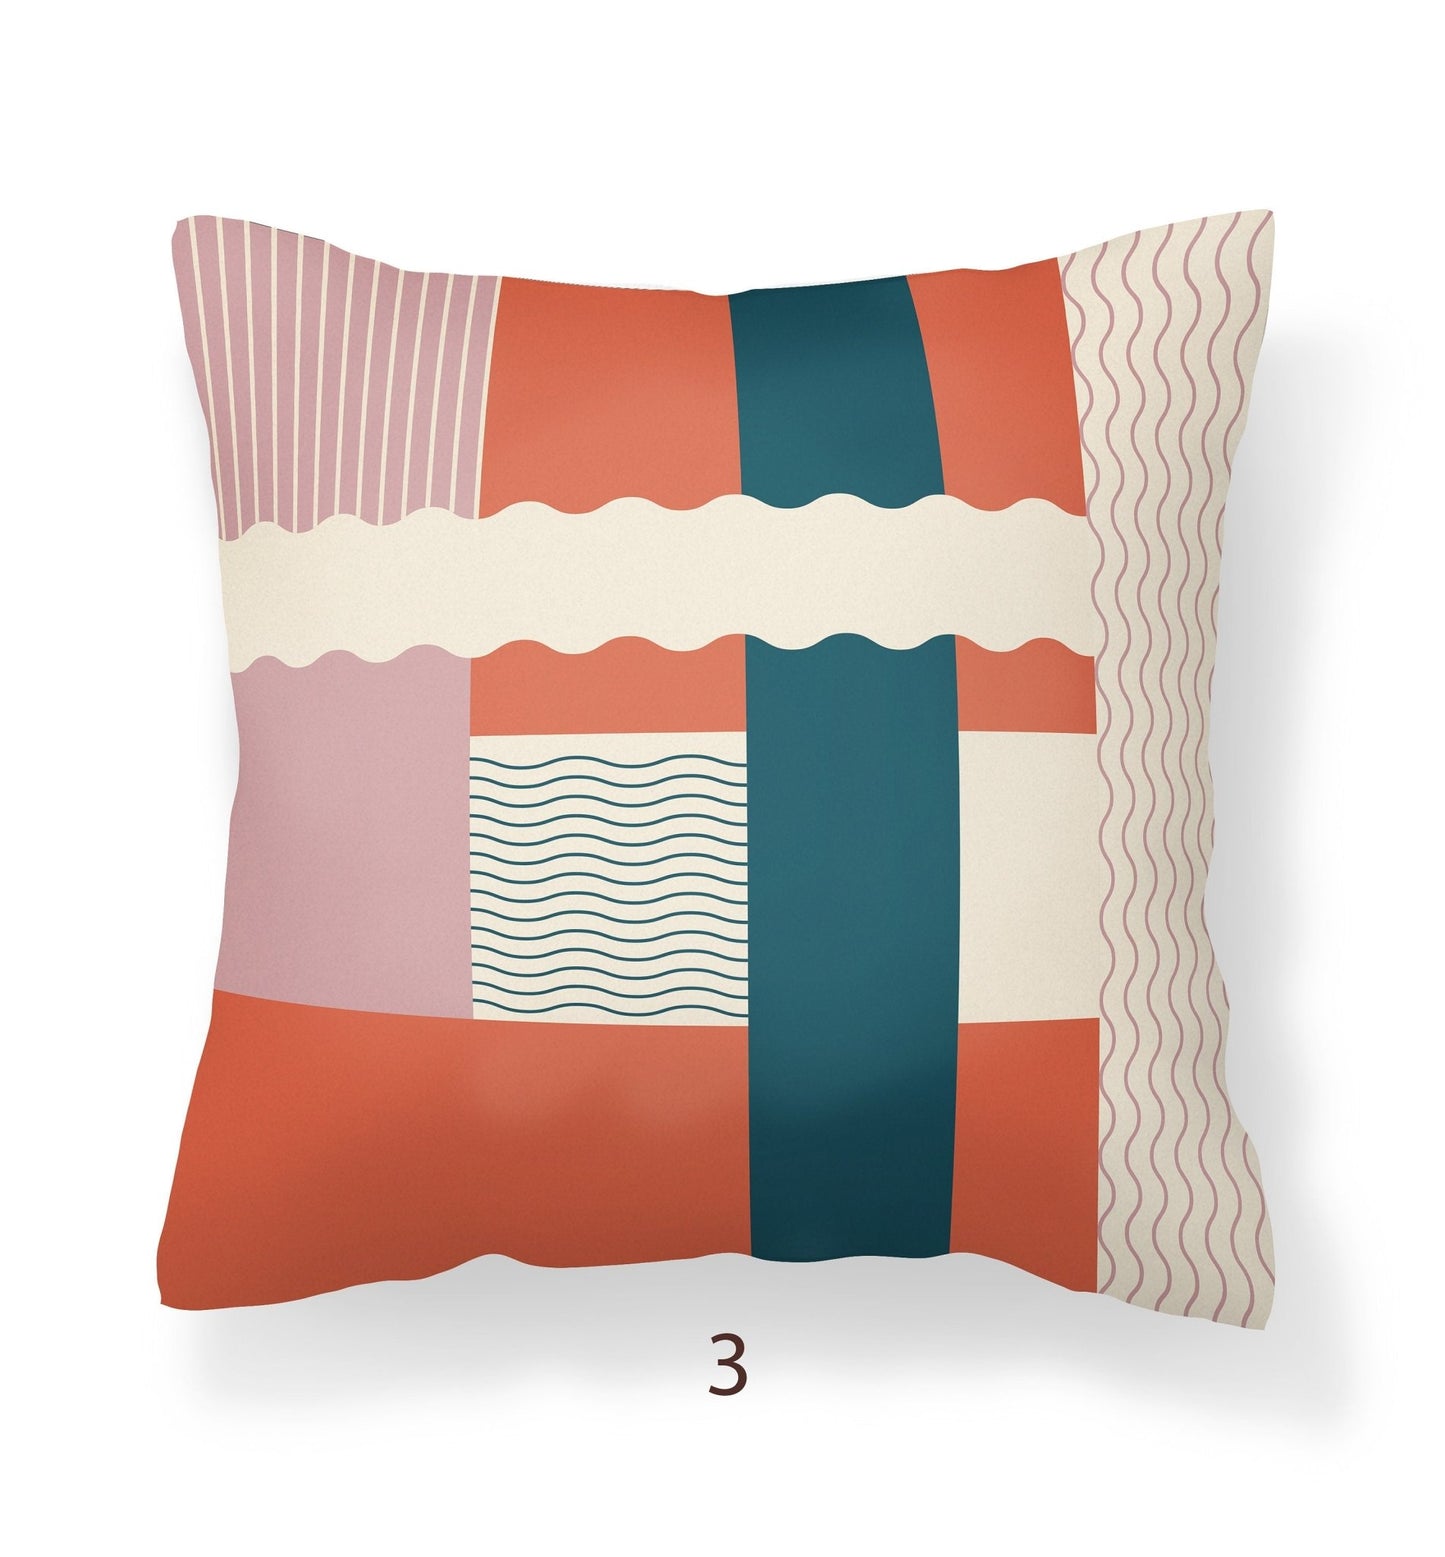 Colorful Outdoor Pillows - Mix and Match - Throw Pillows